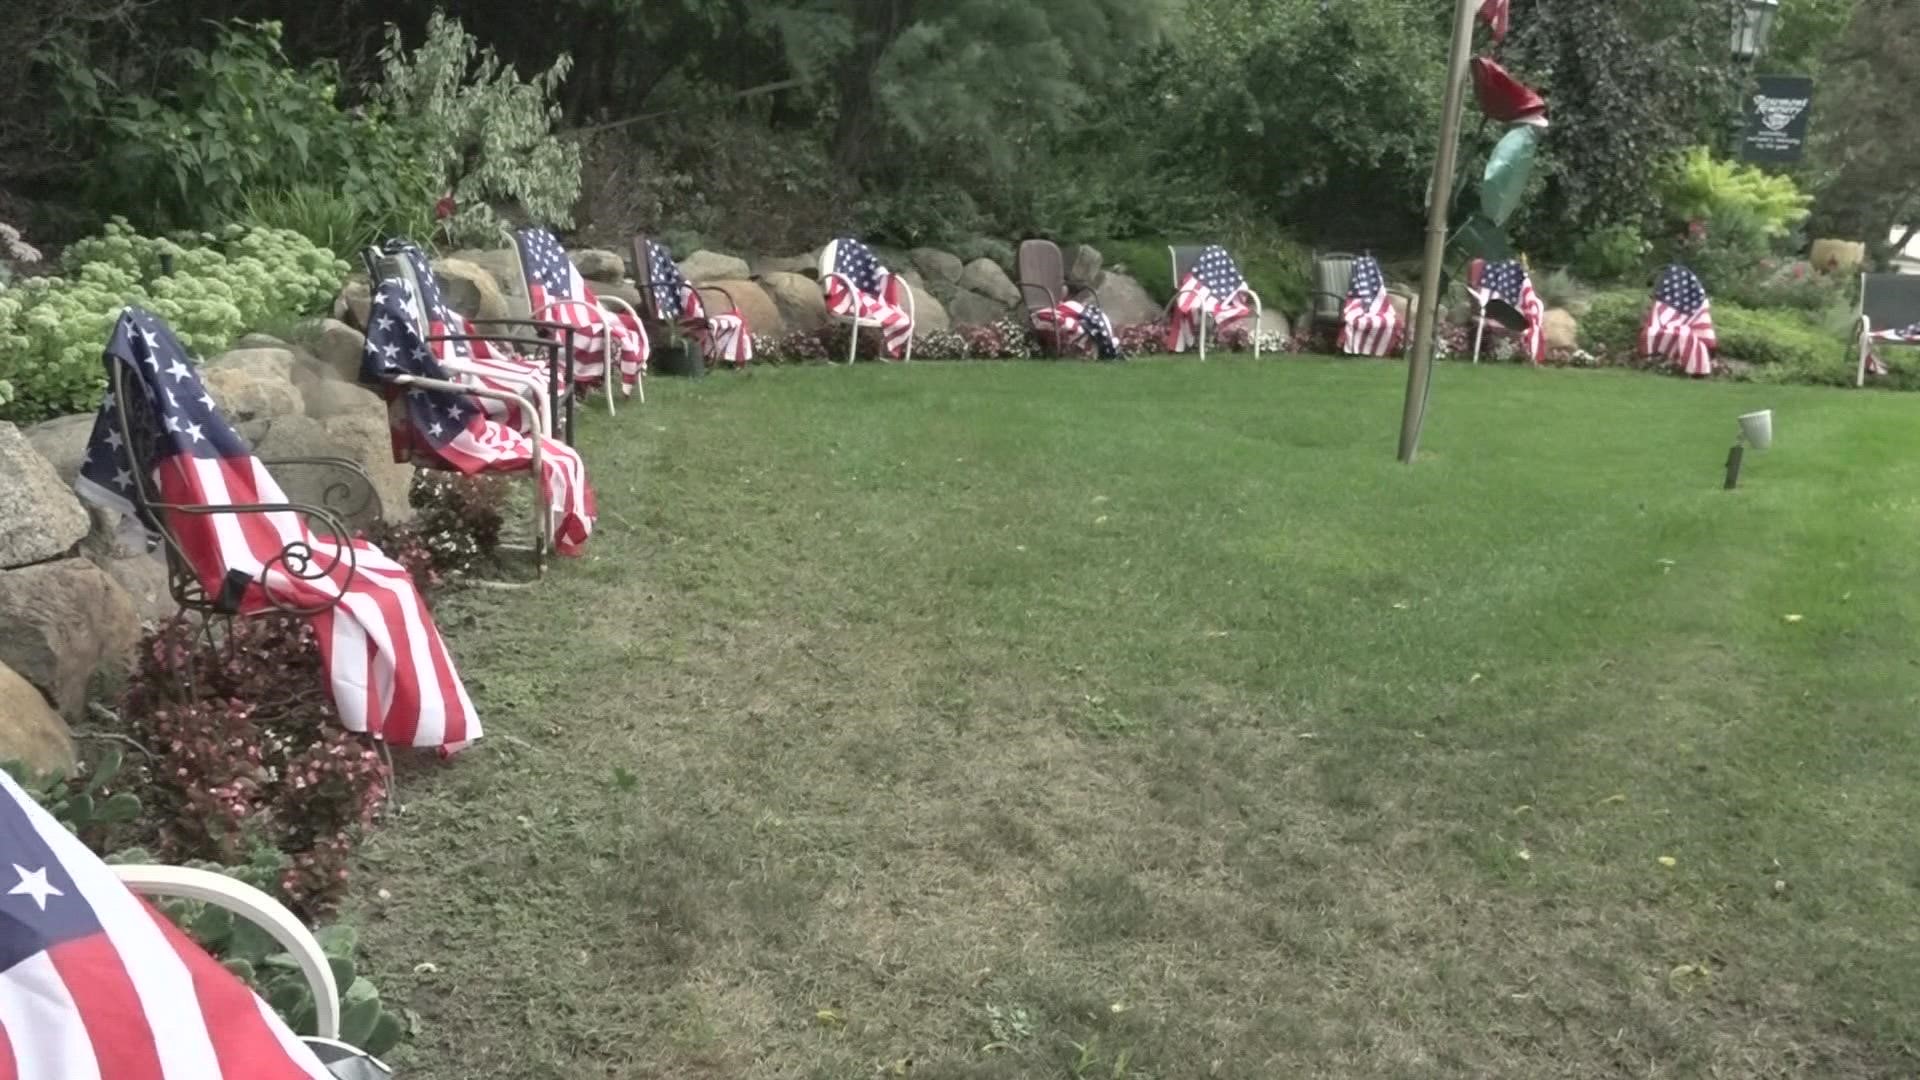 The memorial on Elmridge Drive NW features 13 chairs, each with an American flag draped over it.